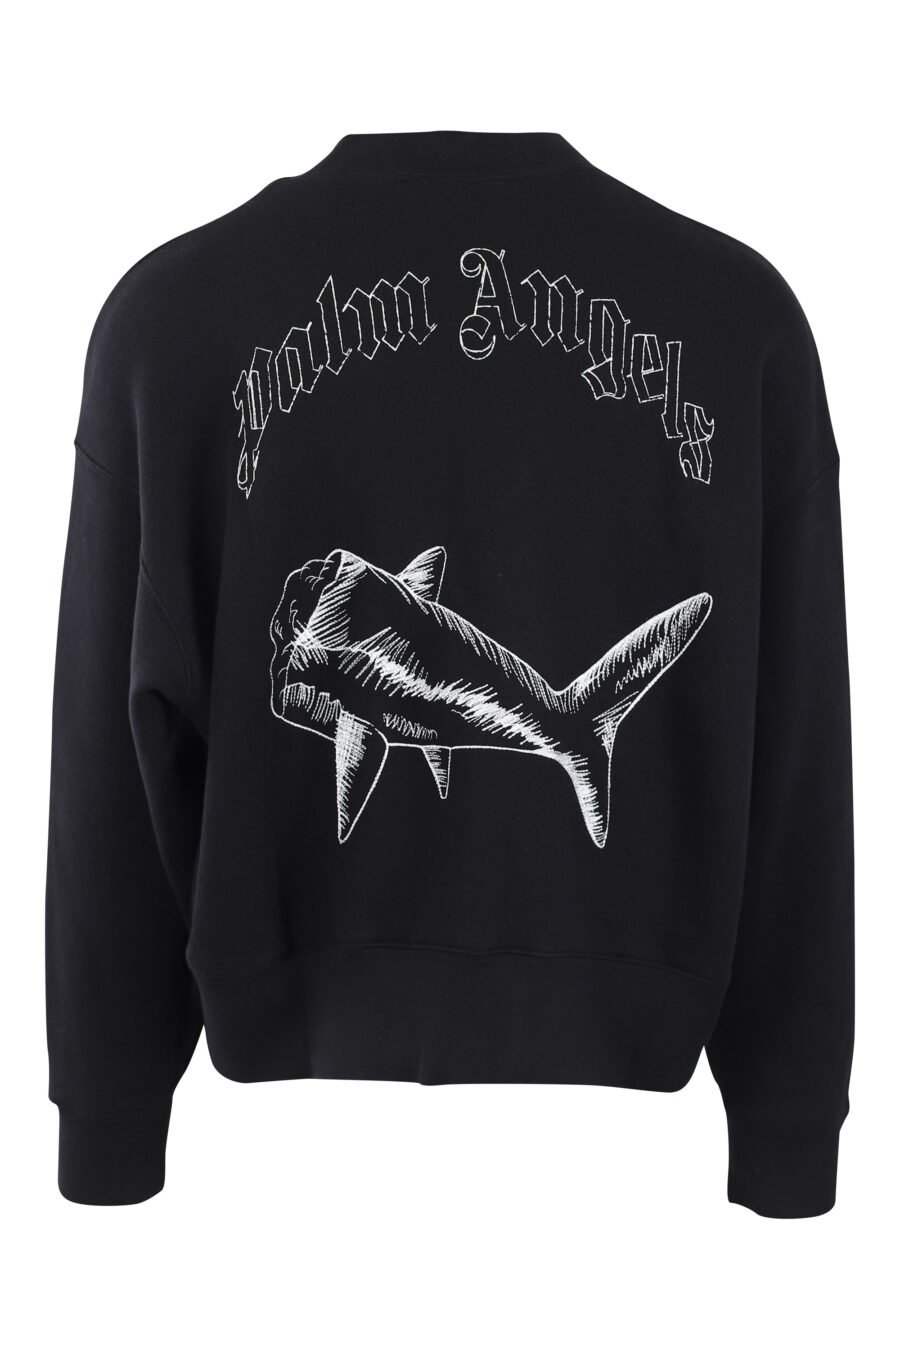 Black sweatshirt with white embroidered shark and logo on the back - IMG 2566